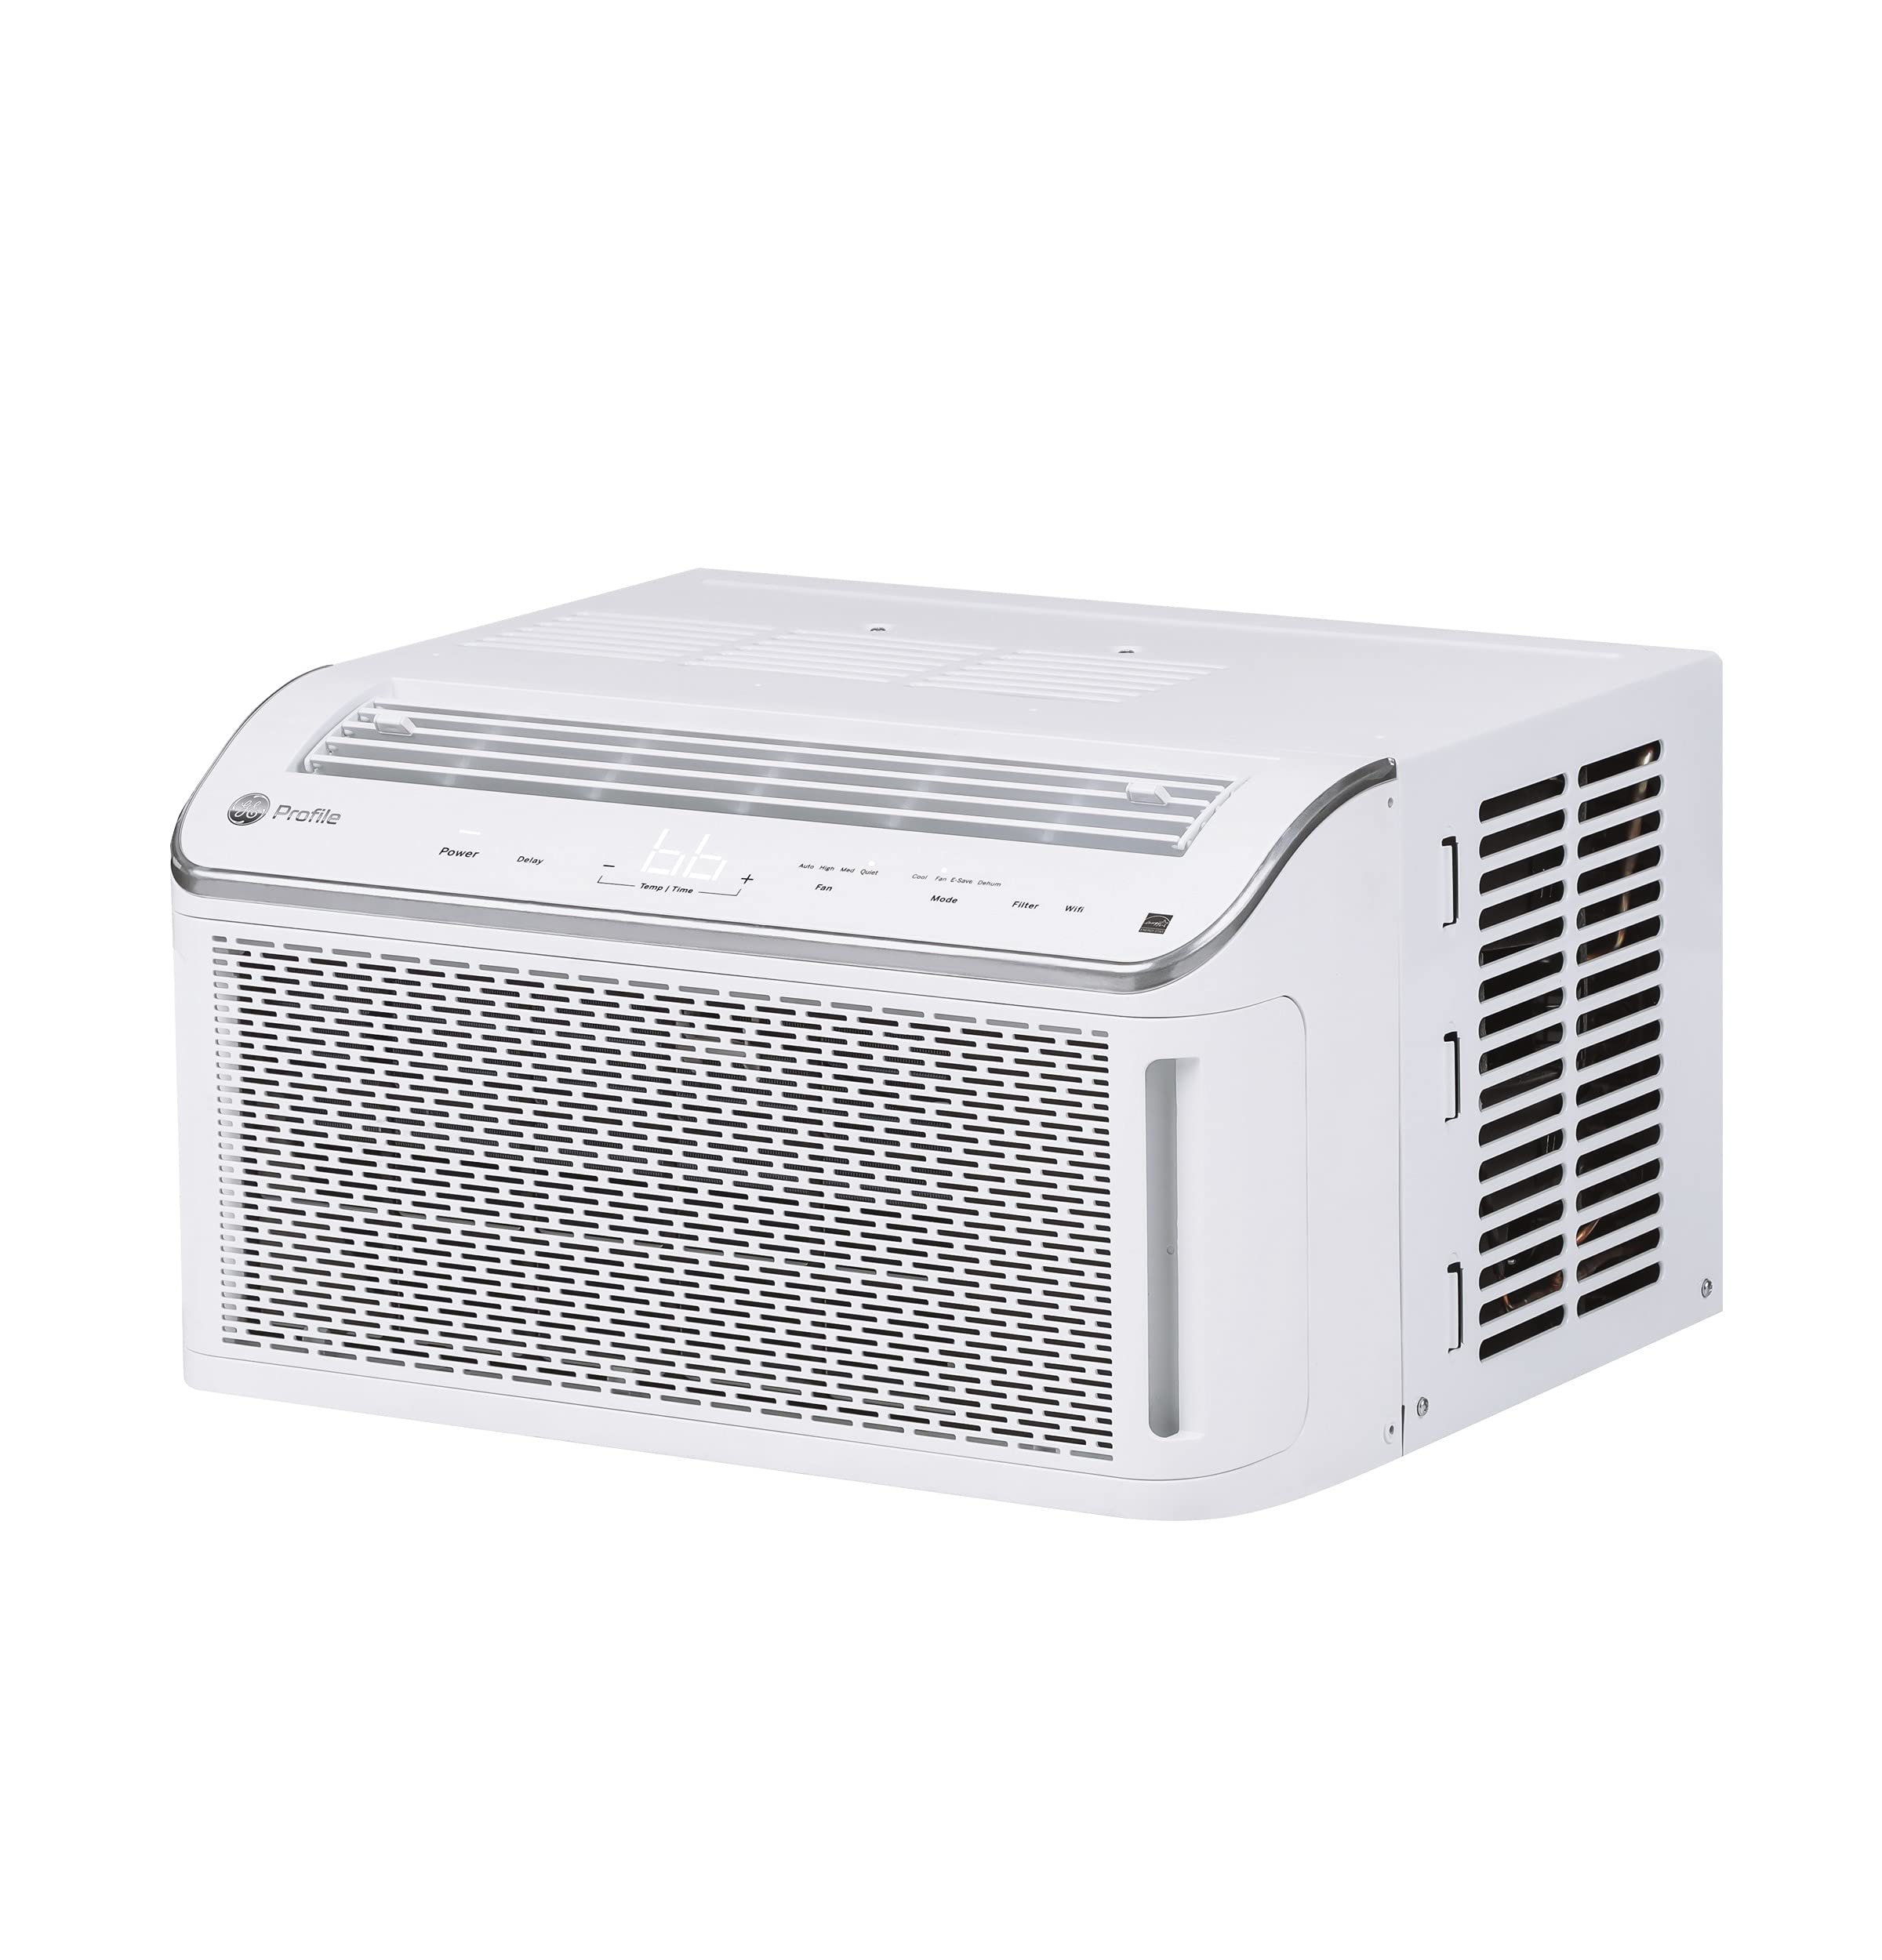 GE Profile Ultra Quiet Window Air Conditioner 8,200 BTU, WiFi Enabled, Ideal for Medium Rooms, Easy Installation with Included Kit, White - image 1 of 6